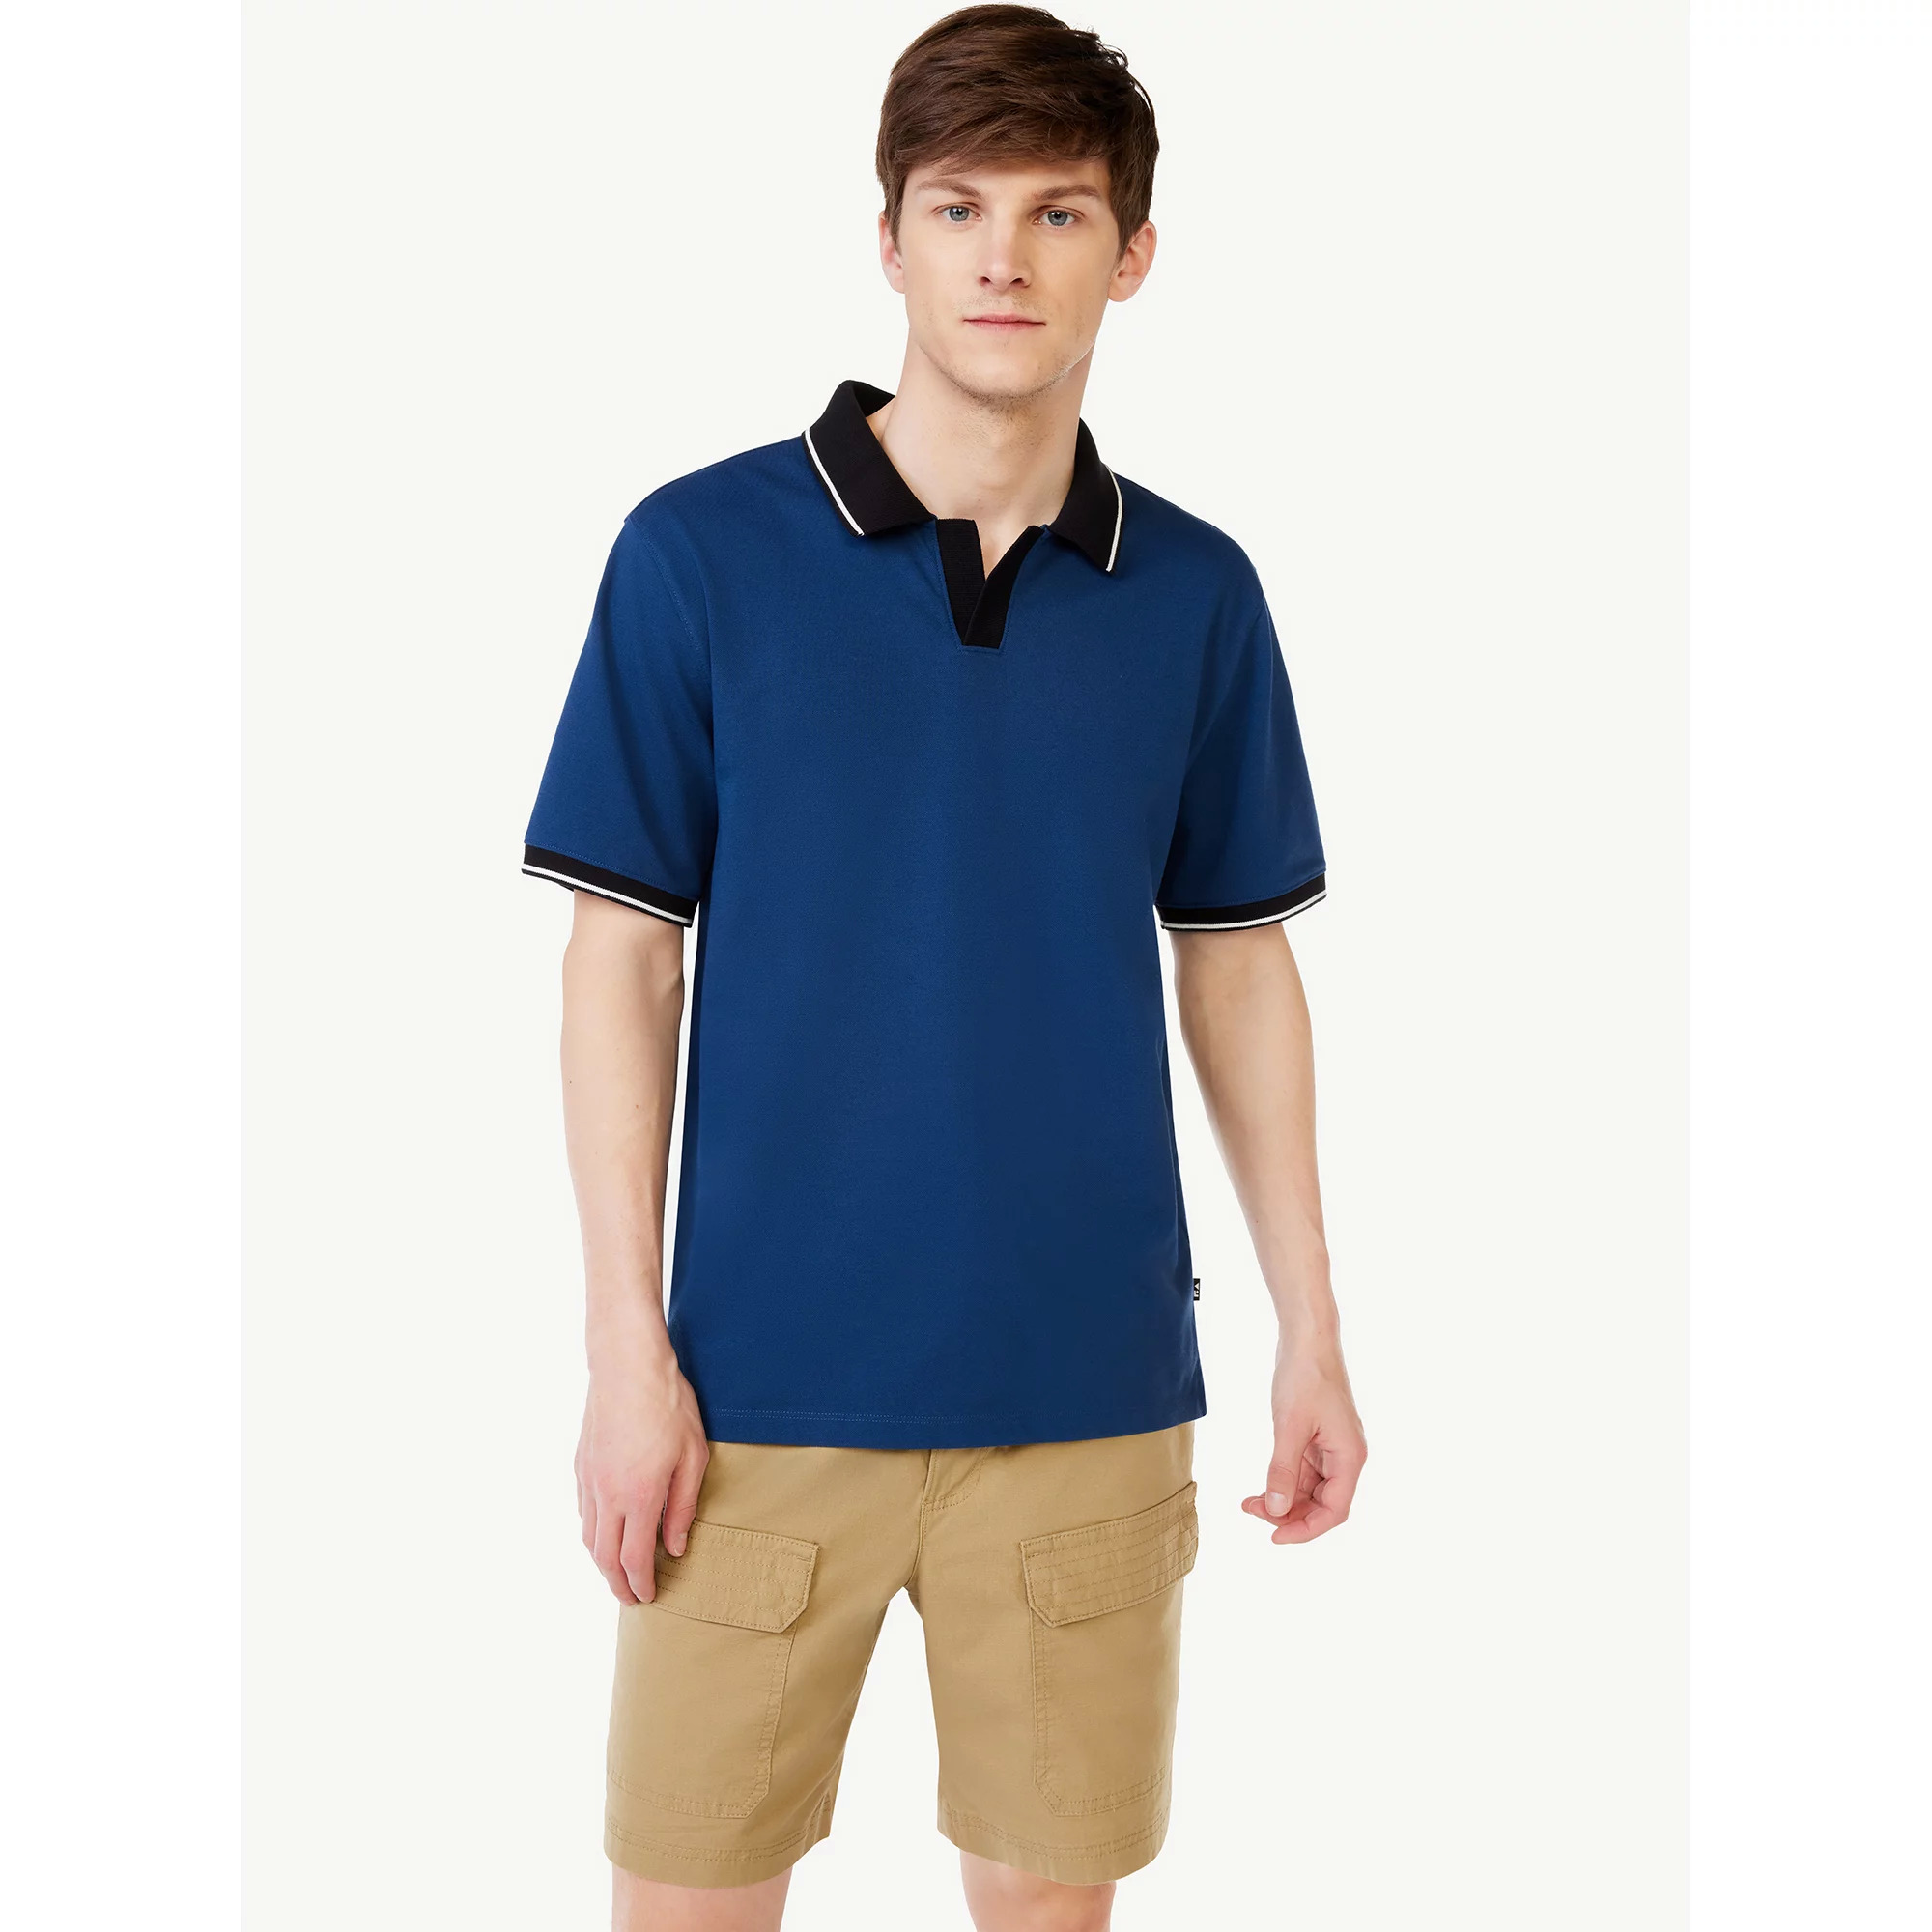 Free Assembly Men's Tipped Pique Polo Shirt (Various Colors) from $10.11 + Free S&H w/ Walmart+ or $35+